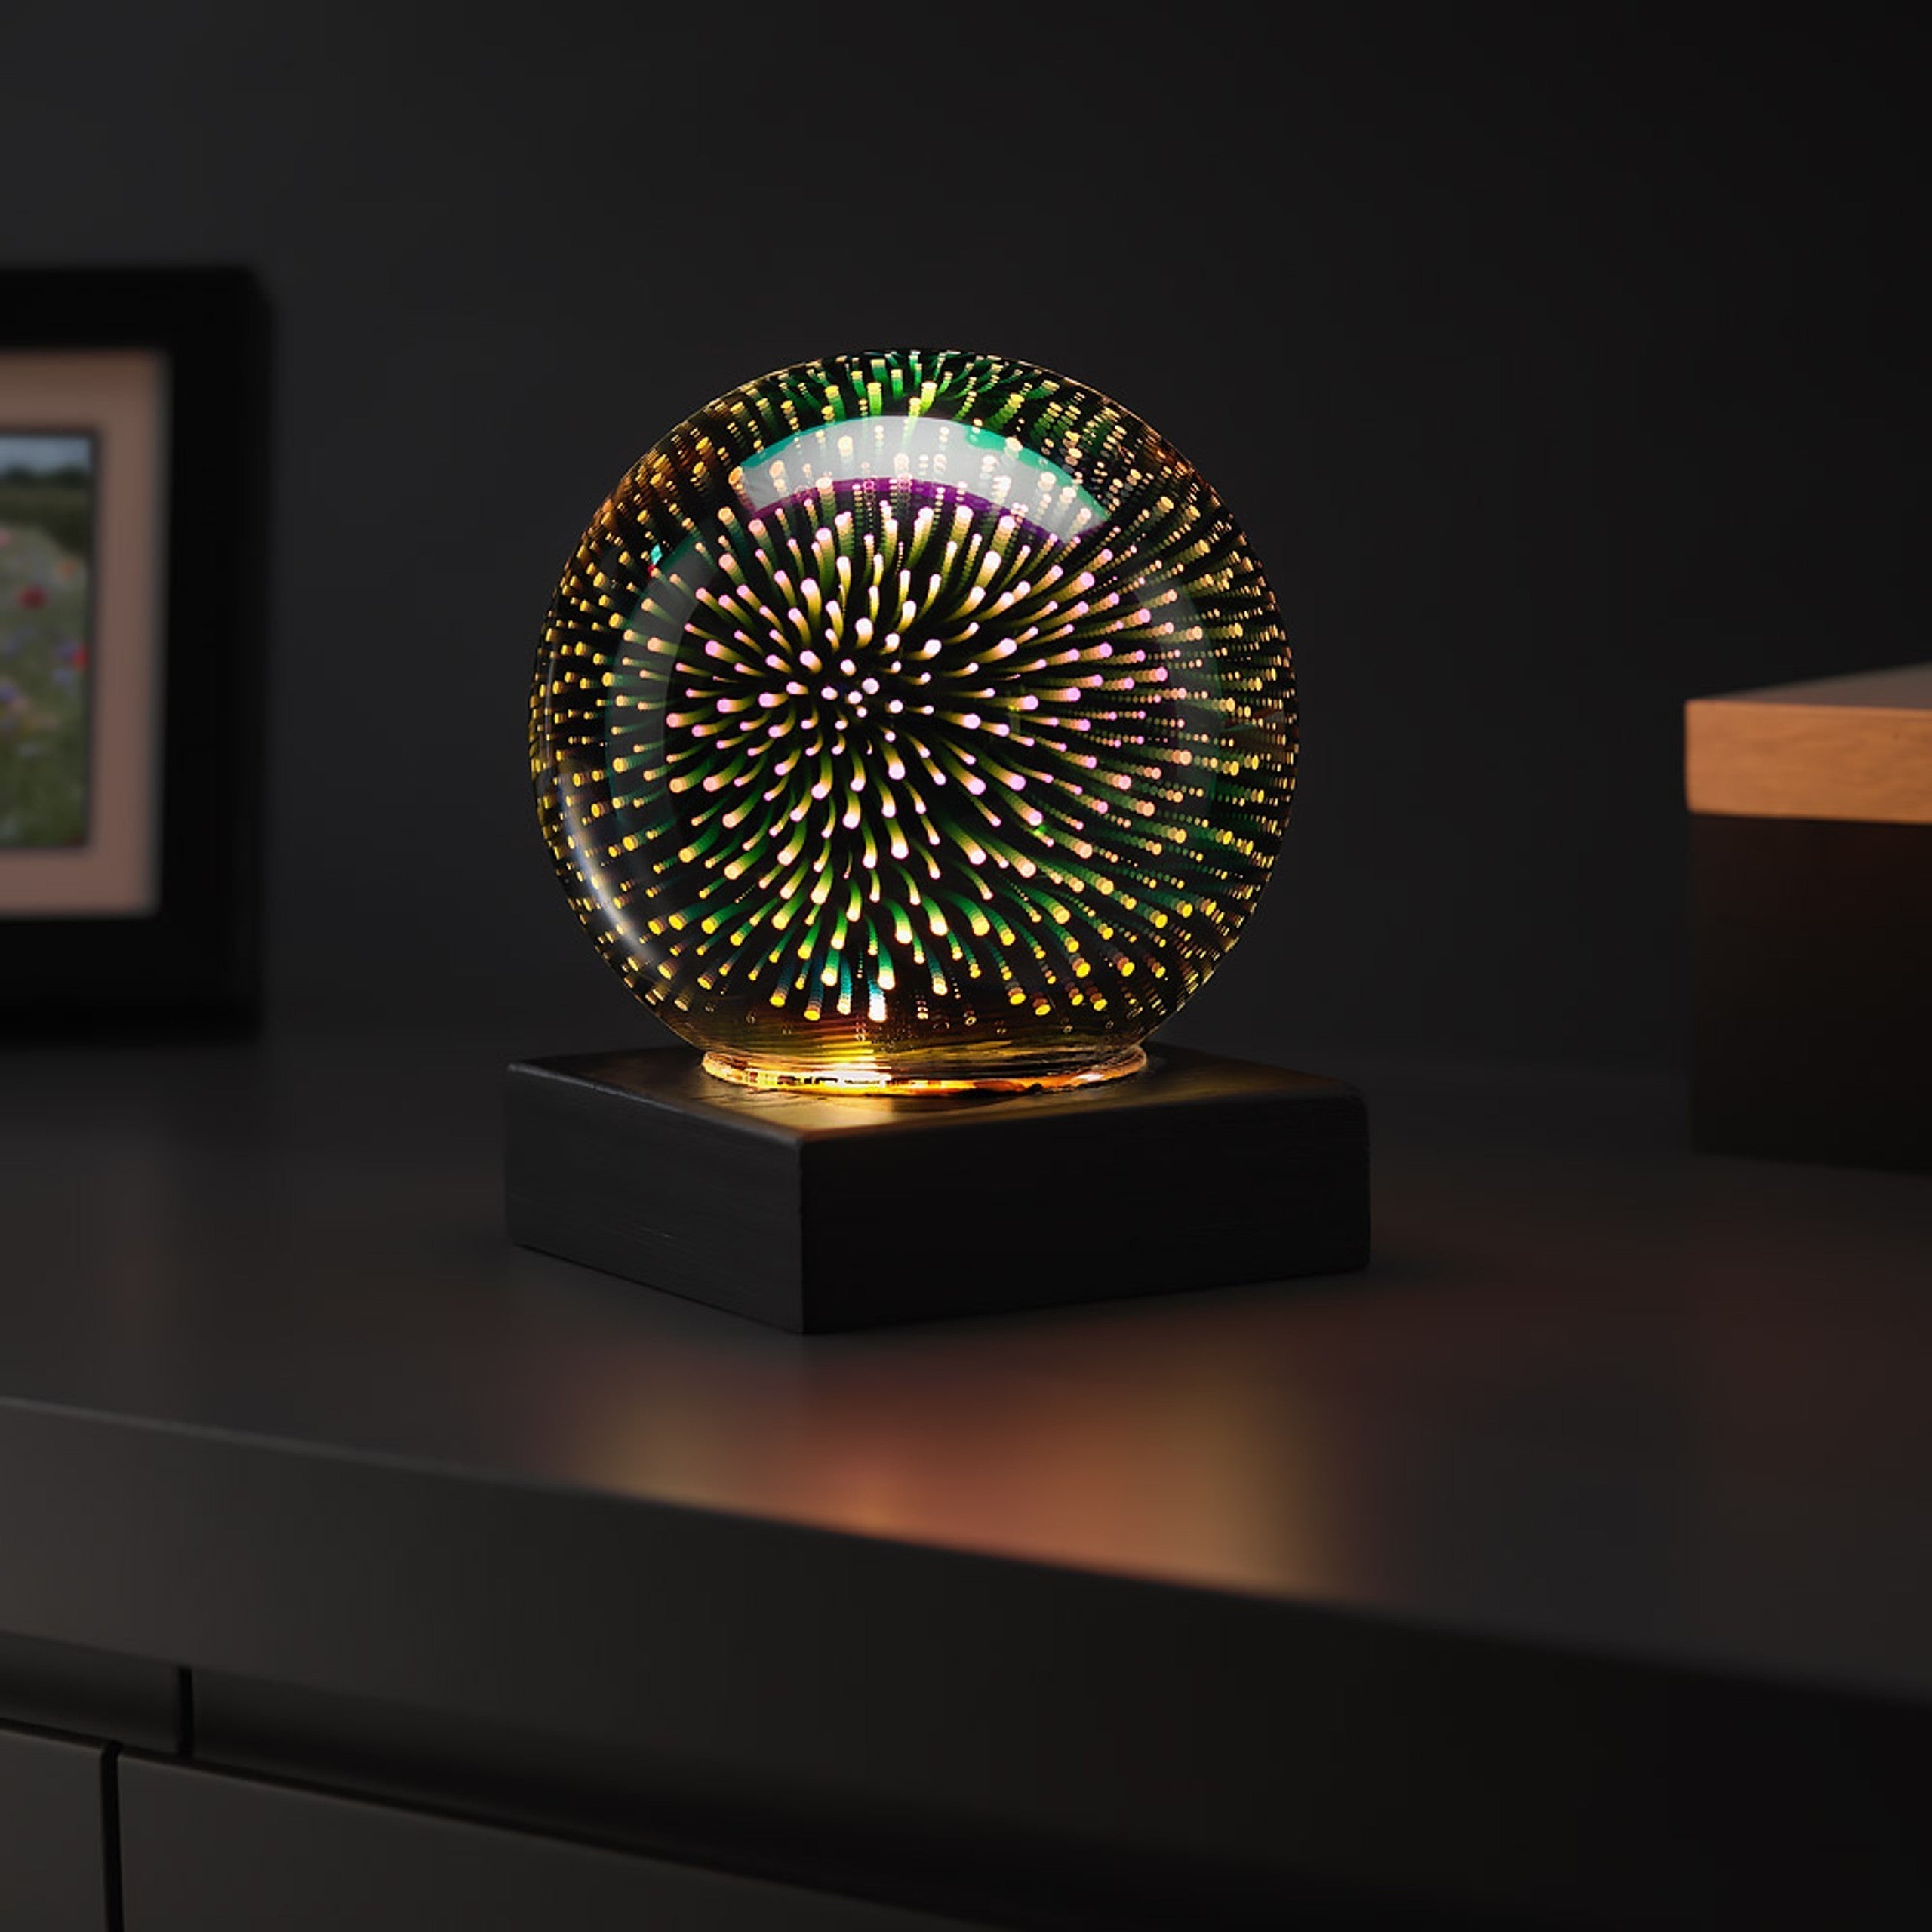 RED5 3D LED Fibre Ball Light, Add a colourful touch to any room with this amazing LED 3D USB fibre ball light from RED5. This 12cm diameter glass ball emits colourful lights in a beautiful pattern giving your room an awesome LED glow.It is USB powered so you can easily place it anywhere. This fun little gadget would make an awesome gift to brighten up any room and its perfect for people of all ages, great for getting the party started! It is ideal for any occasion. Features: Ball Diameter: 12cm Includes a 1